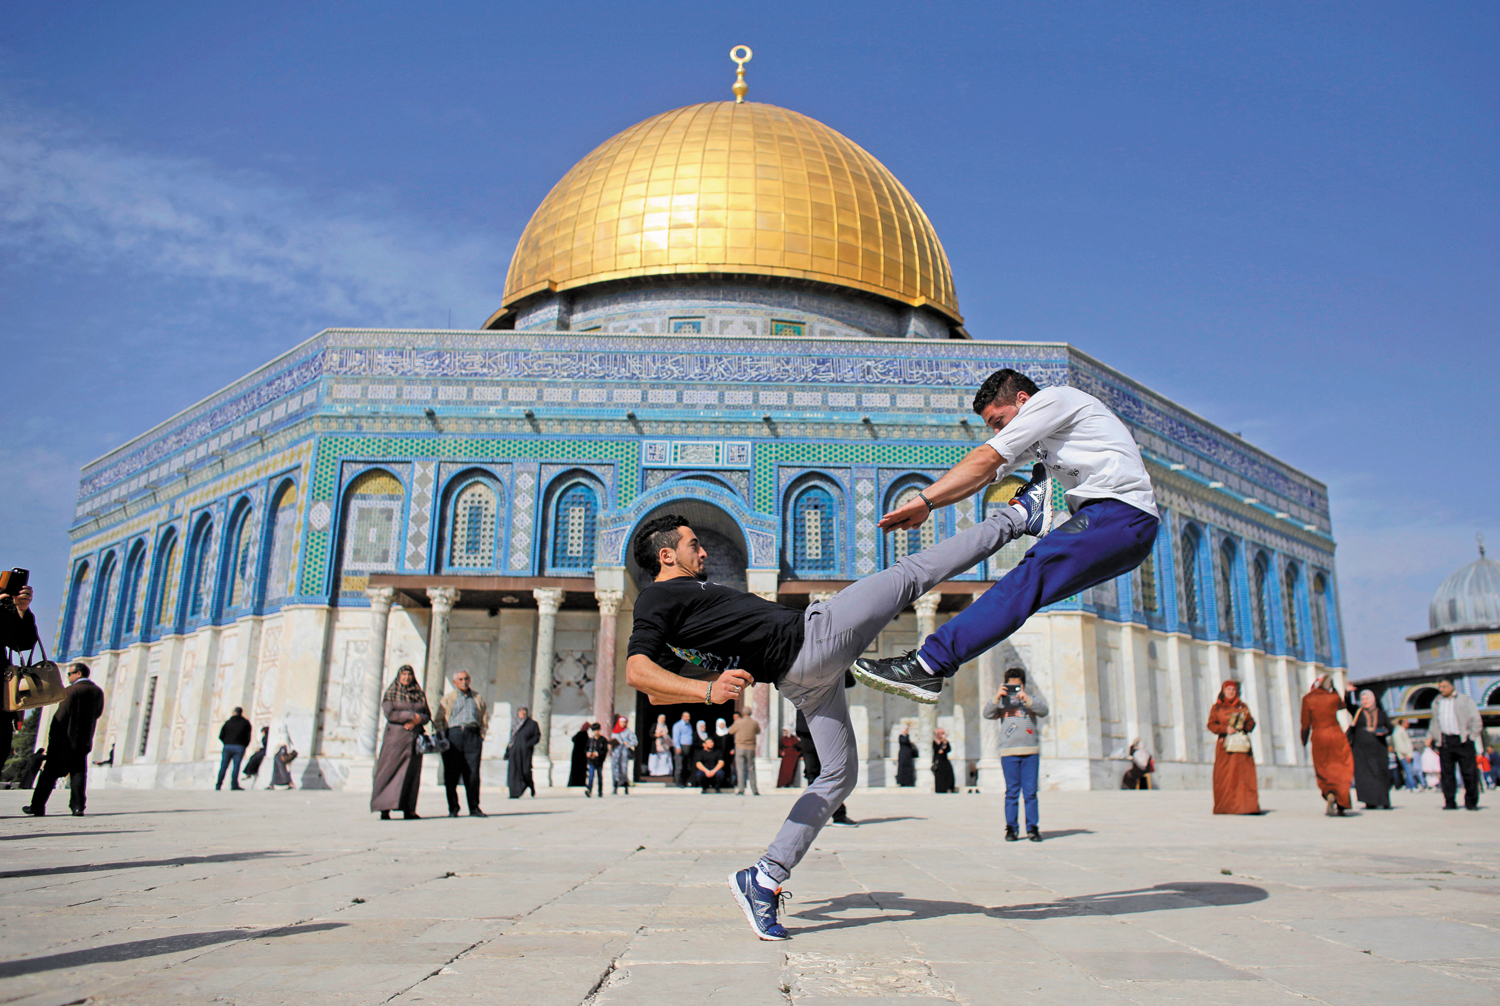 Snapshot: Palestinian Parkour Under the Dome